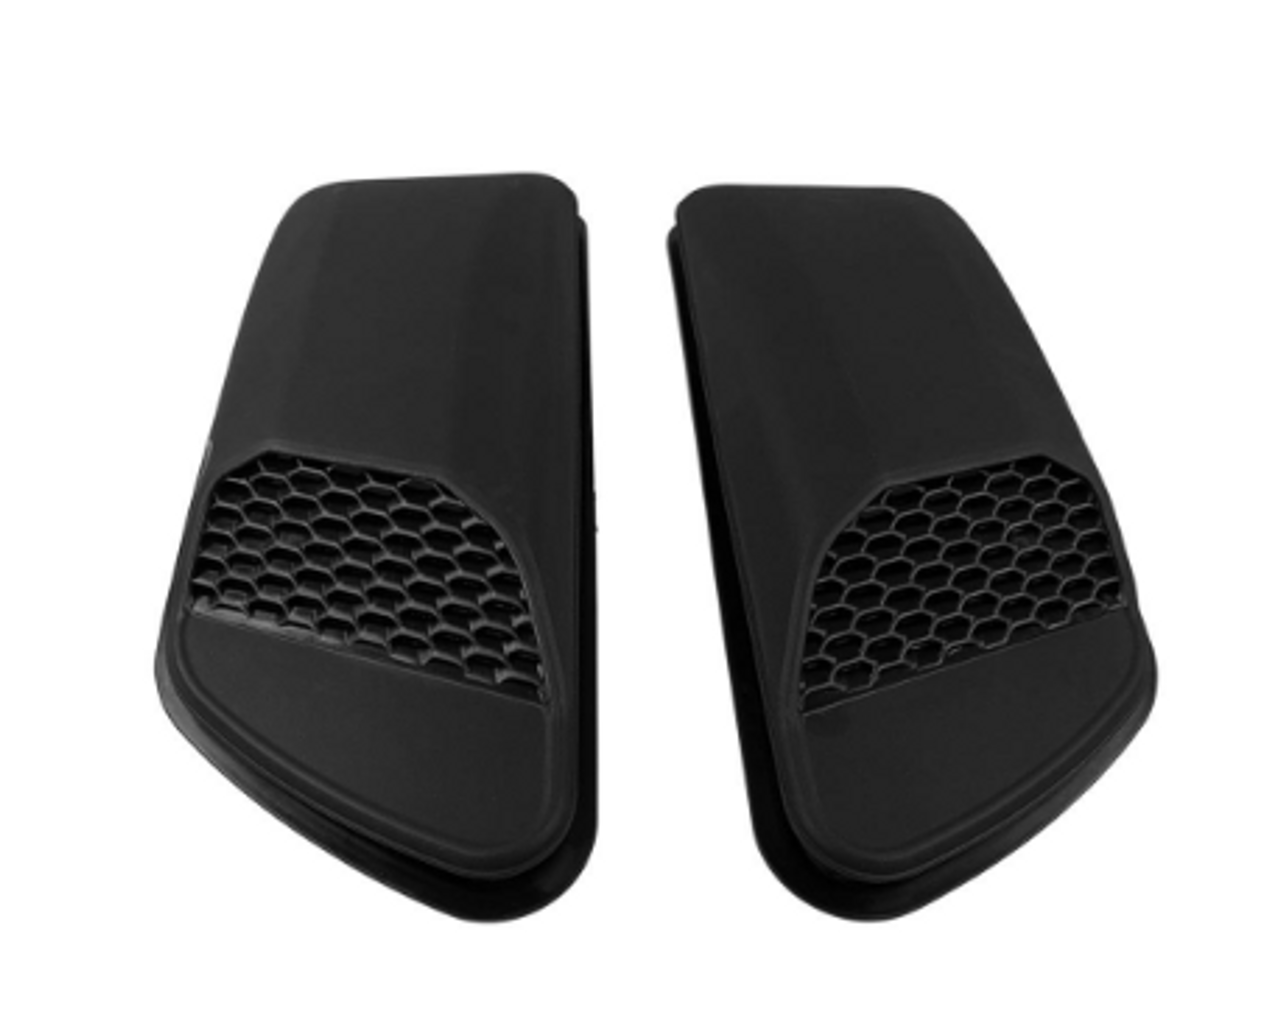 S&B Filters AS-1014 Air Hood Scoop Kit for Jeep Wrangler JL & Gladiator Rubicon 2018+